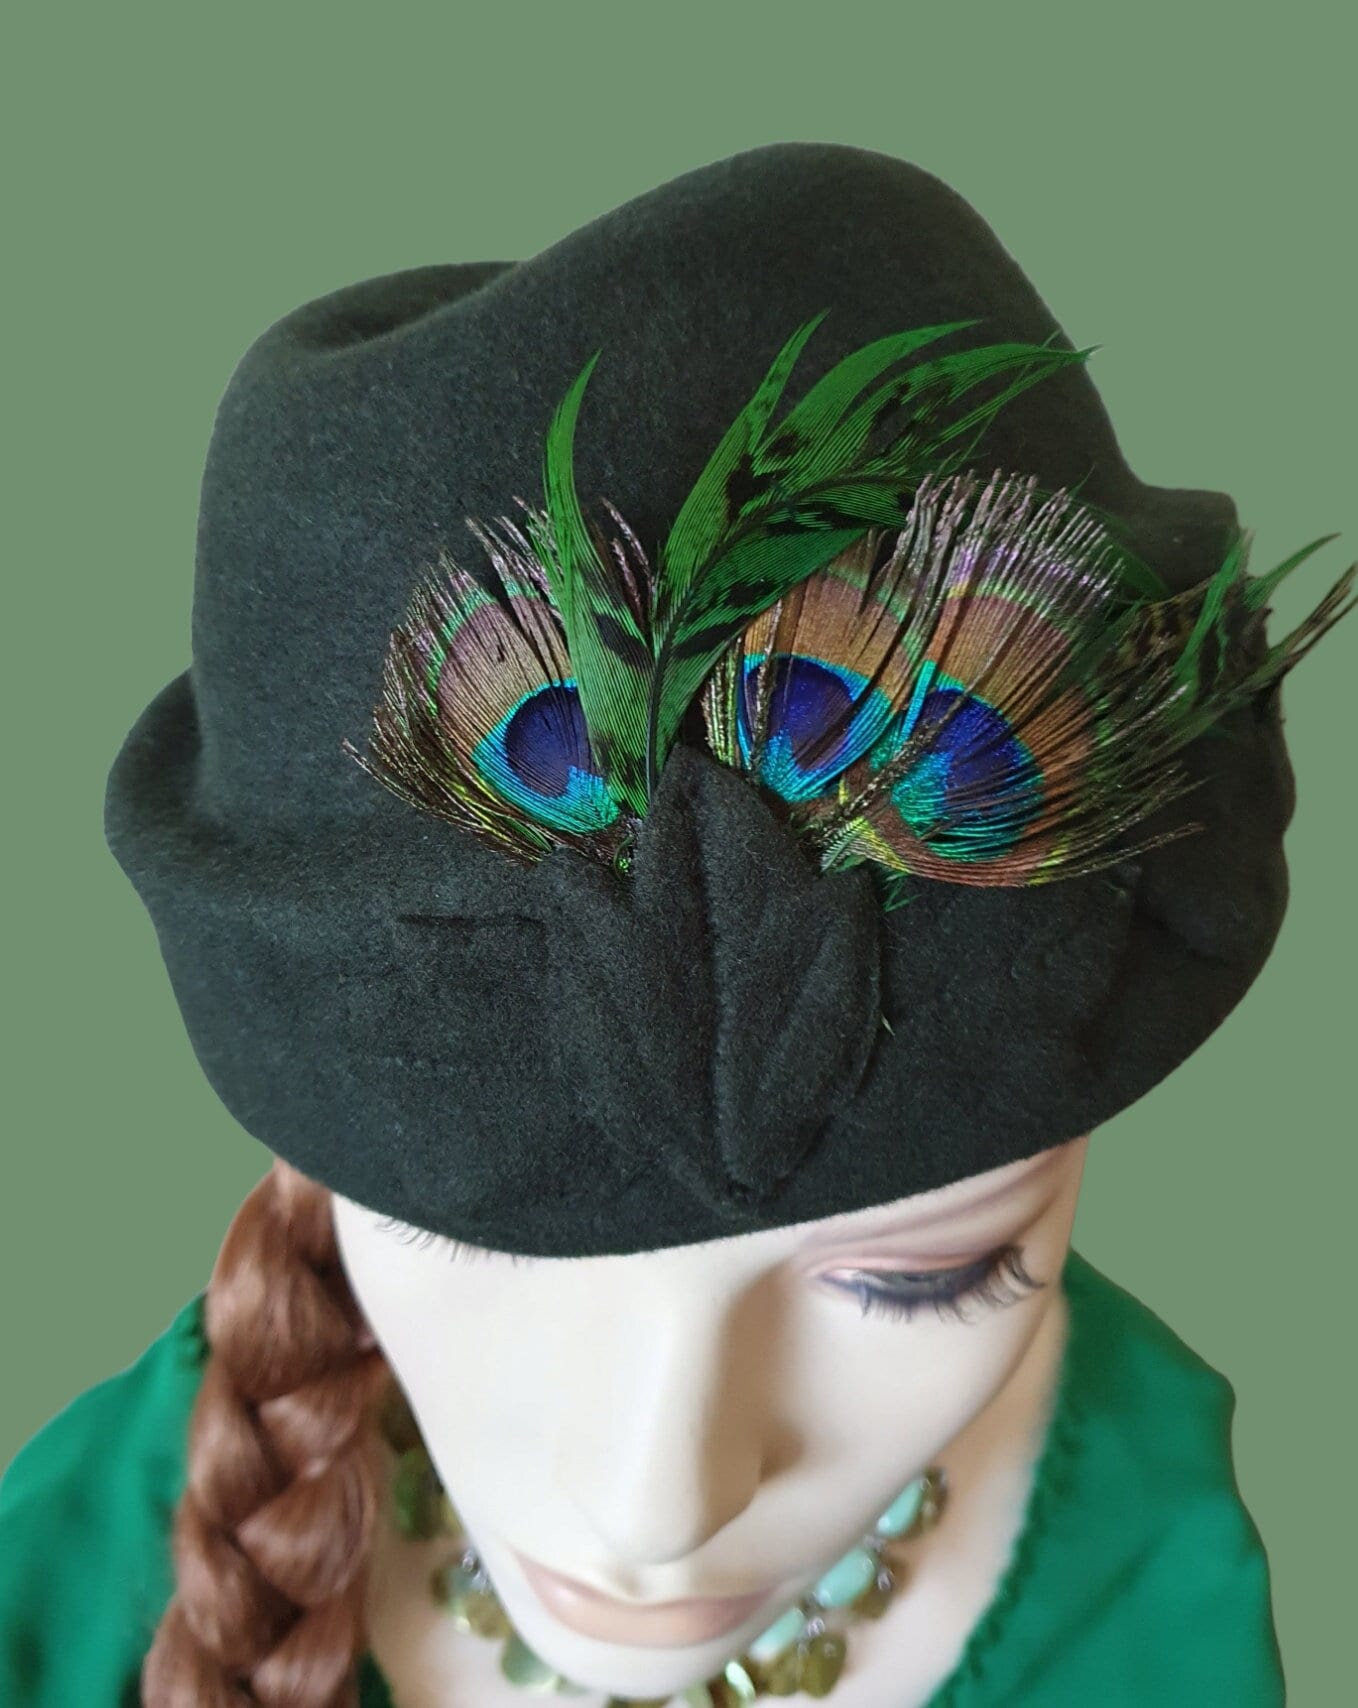 Unique Handmade Green Pillbox Hat with Peacock Feathers, winter hat, fascinator, guest hat, event, wedding.